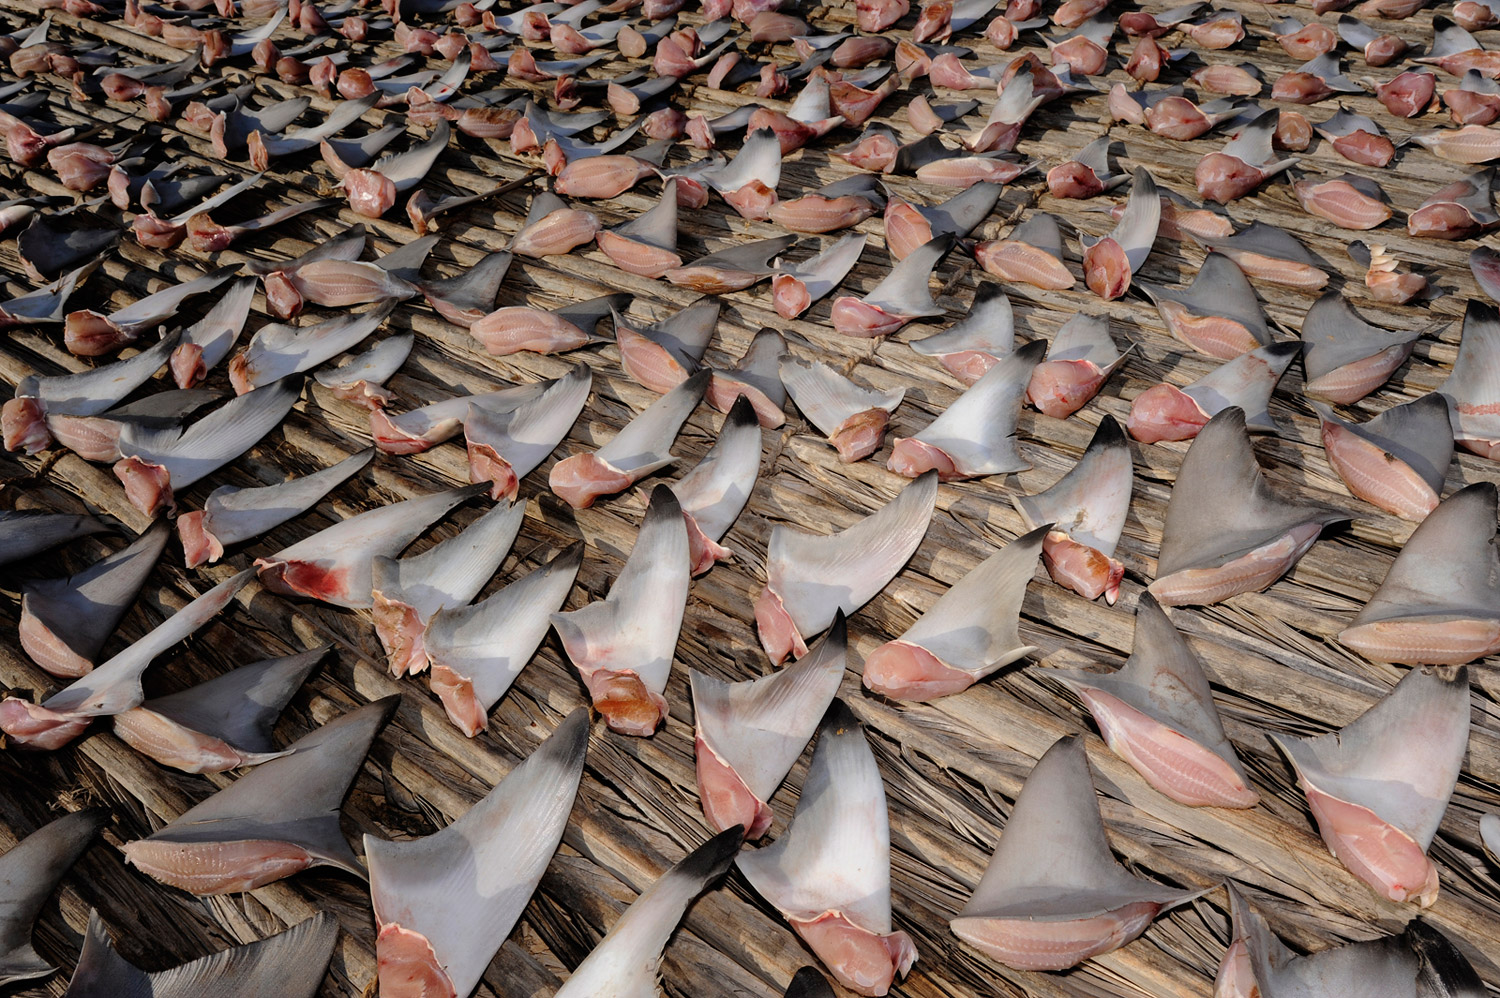 Shark fins are laid out on palm fronds to dry in the hot desert sun in Sharqiya province, Oman.